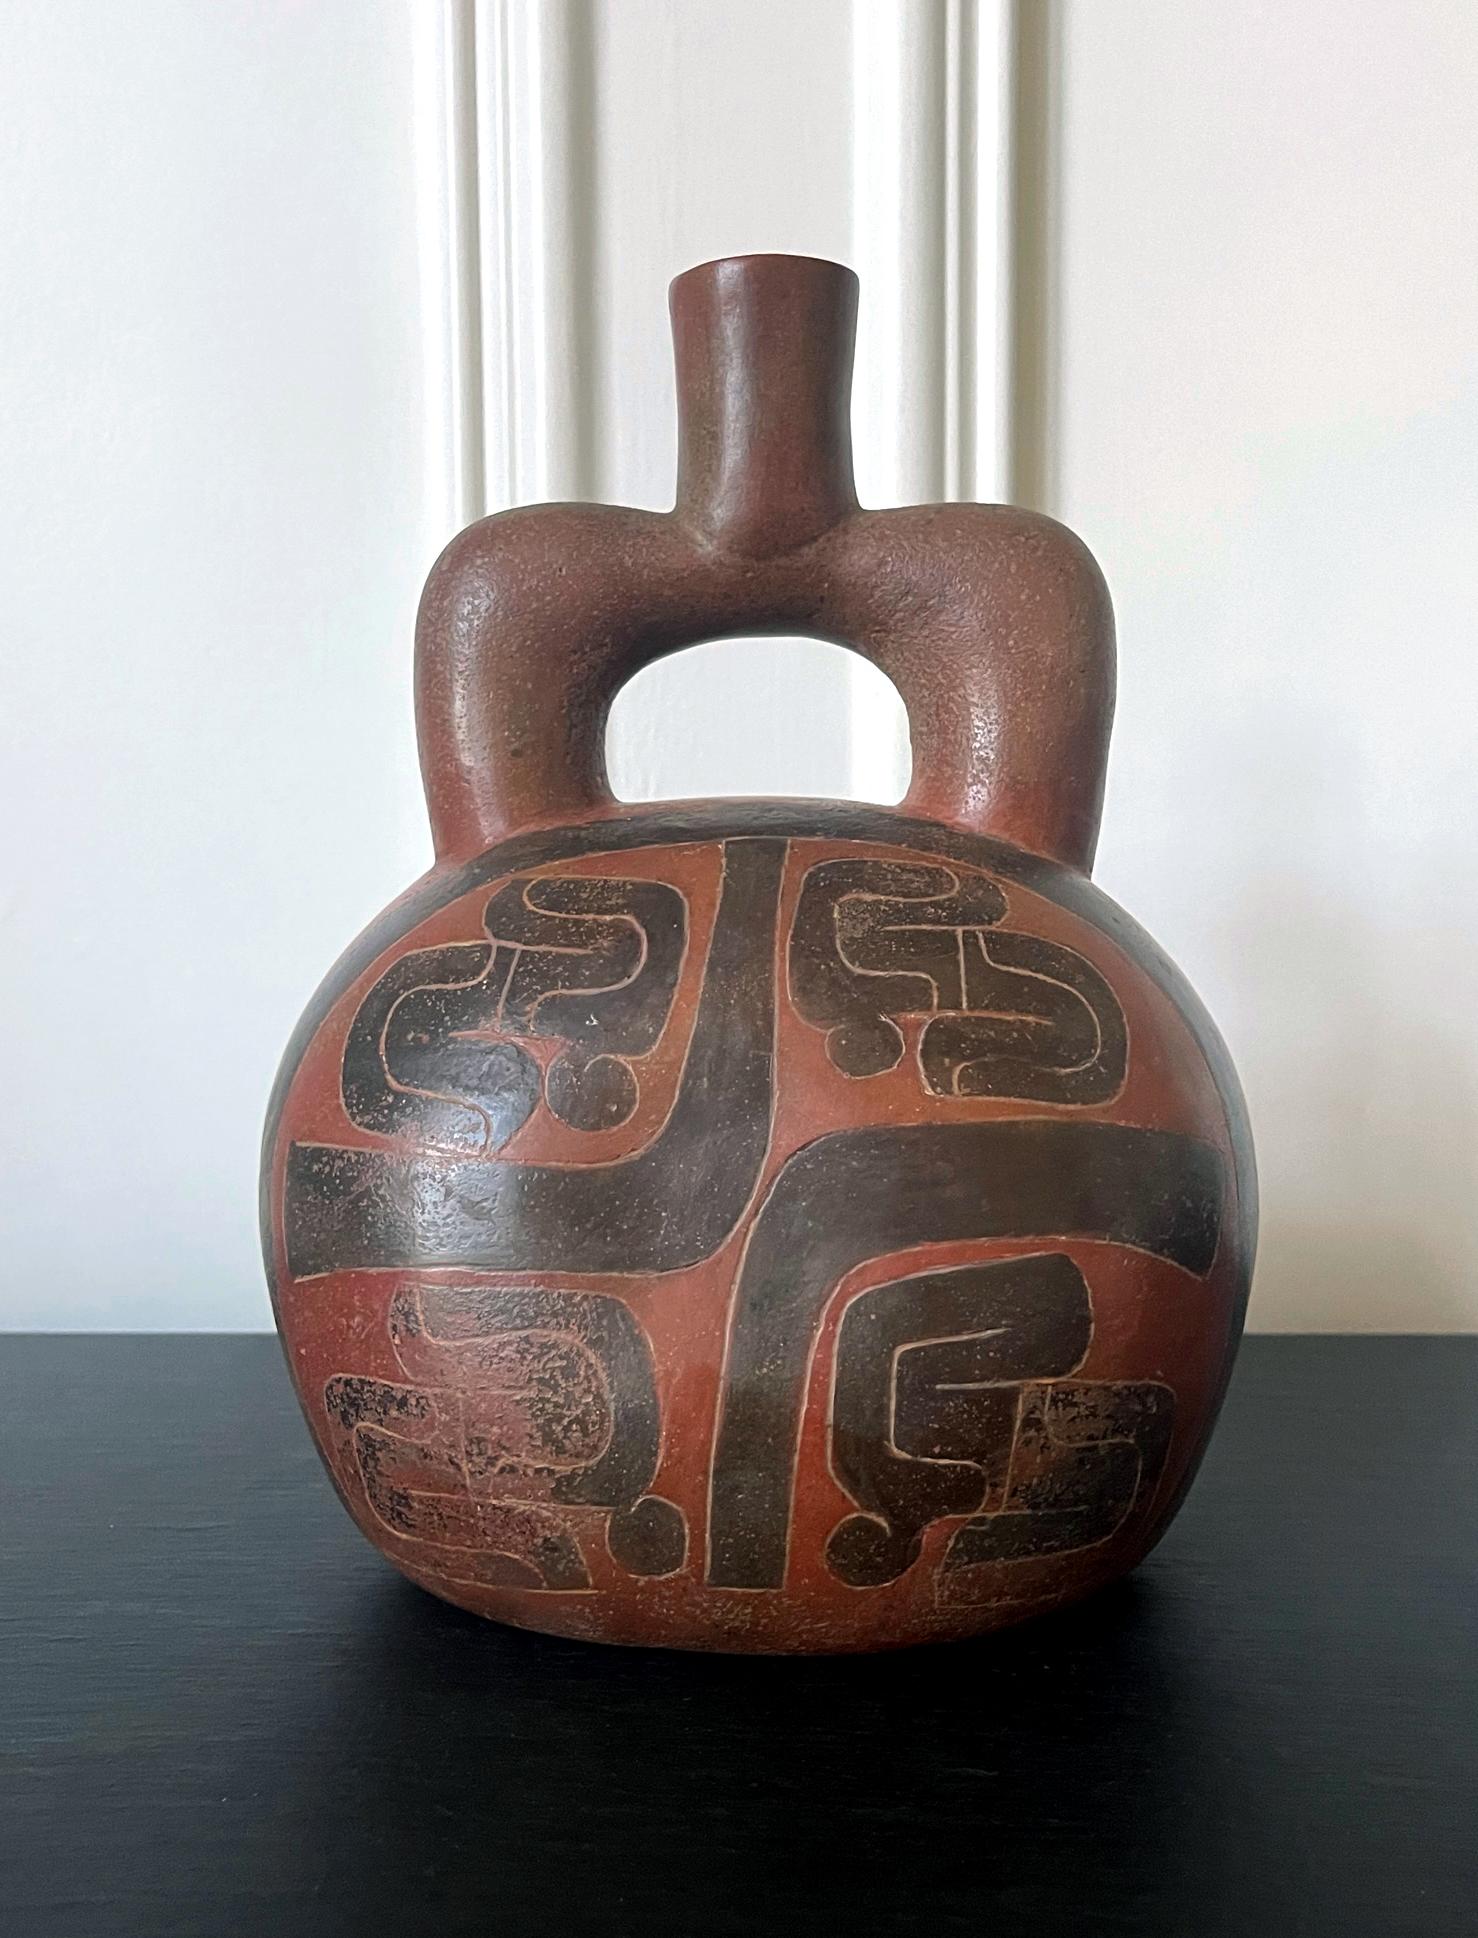 A pre-Columbian ceramic stirrup vessel in Cupisnique style circa 700-500BCE. This ancient vessel features a robust squatted body and a short thick stirrup sprout. Bold geometrical designs in low reliefs colored in black dramatically contrast the red